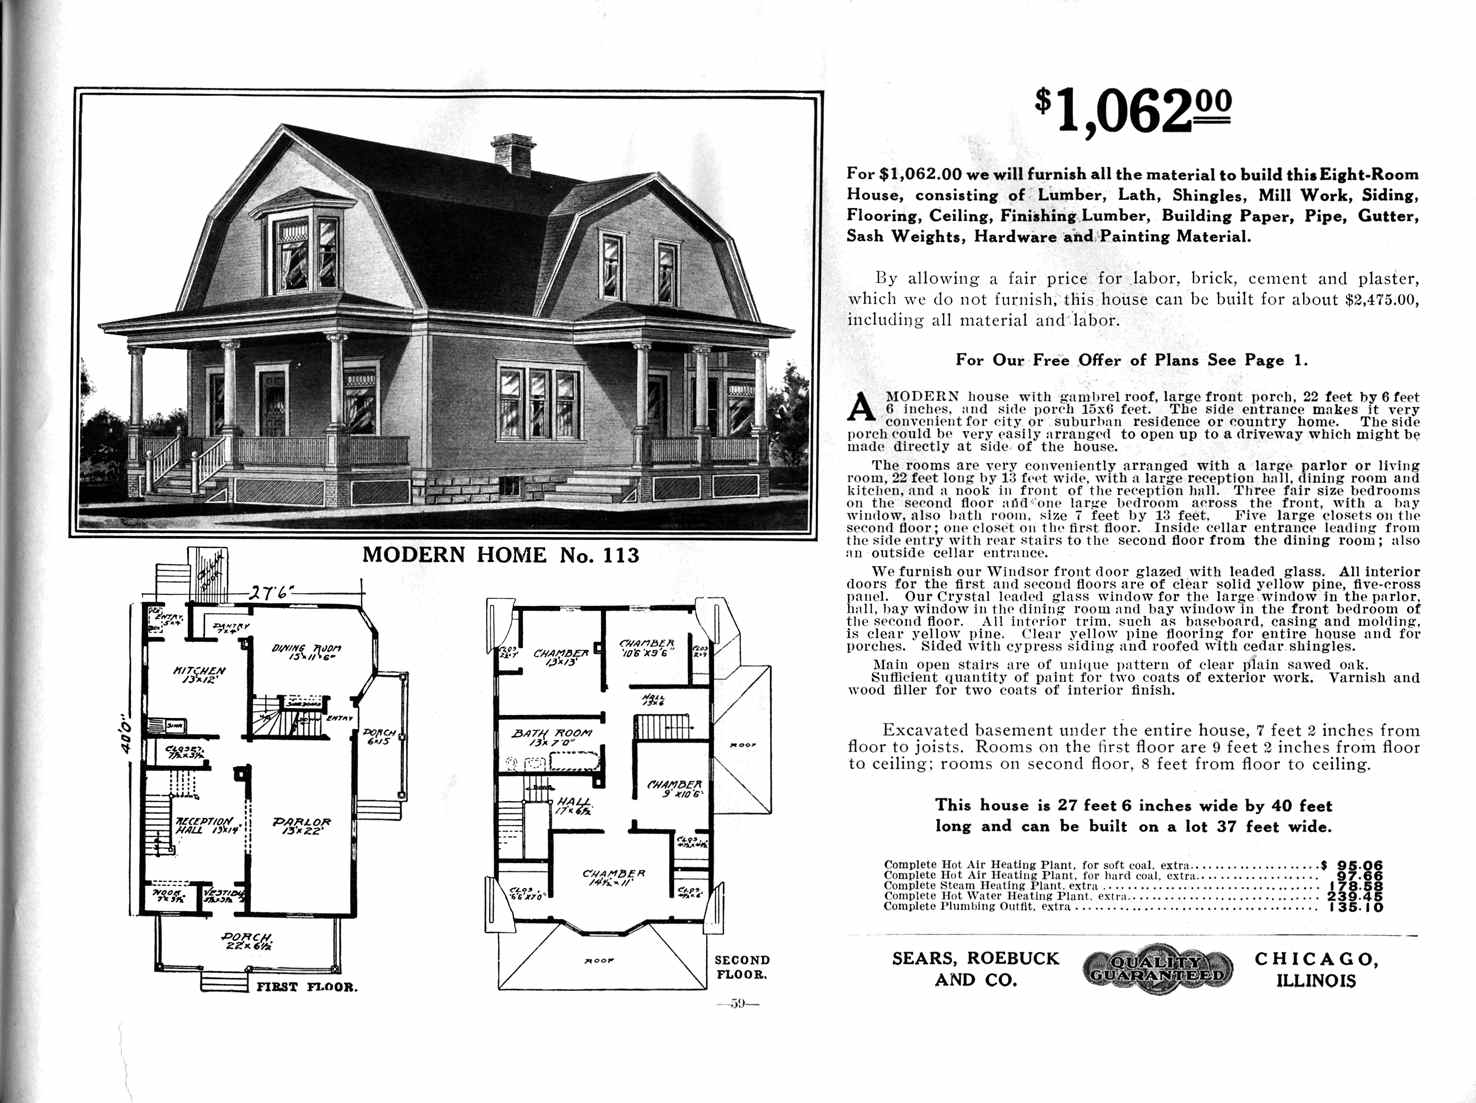 Sears, Roebuck Home Builder's Catalog: The Complete Illustrated